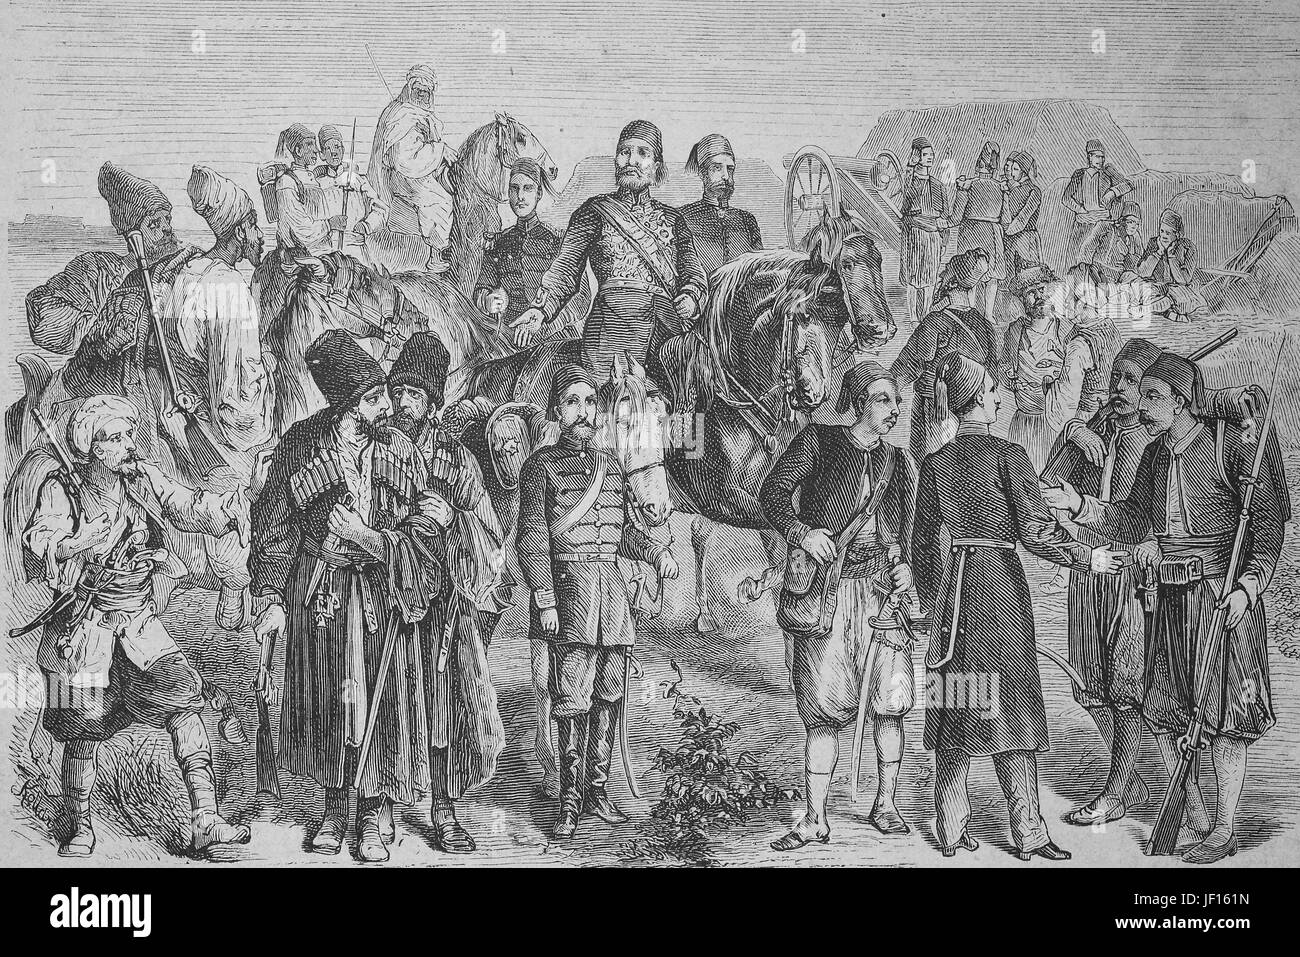 Historical illustration showing the uniforms of the turkish army in the year 1875, Turkey, Digital improved reproduction from an original print from 1888 Stock Photo